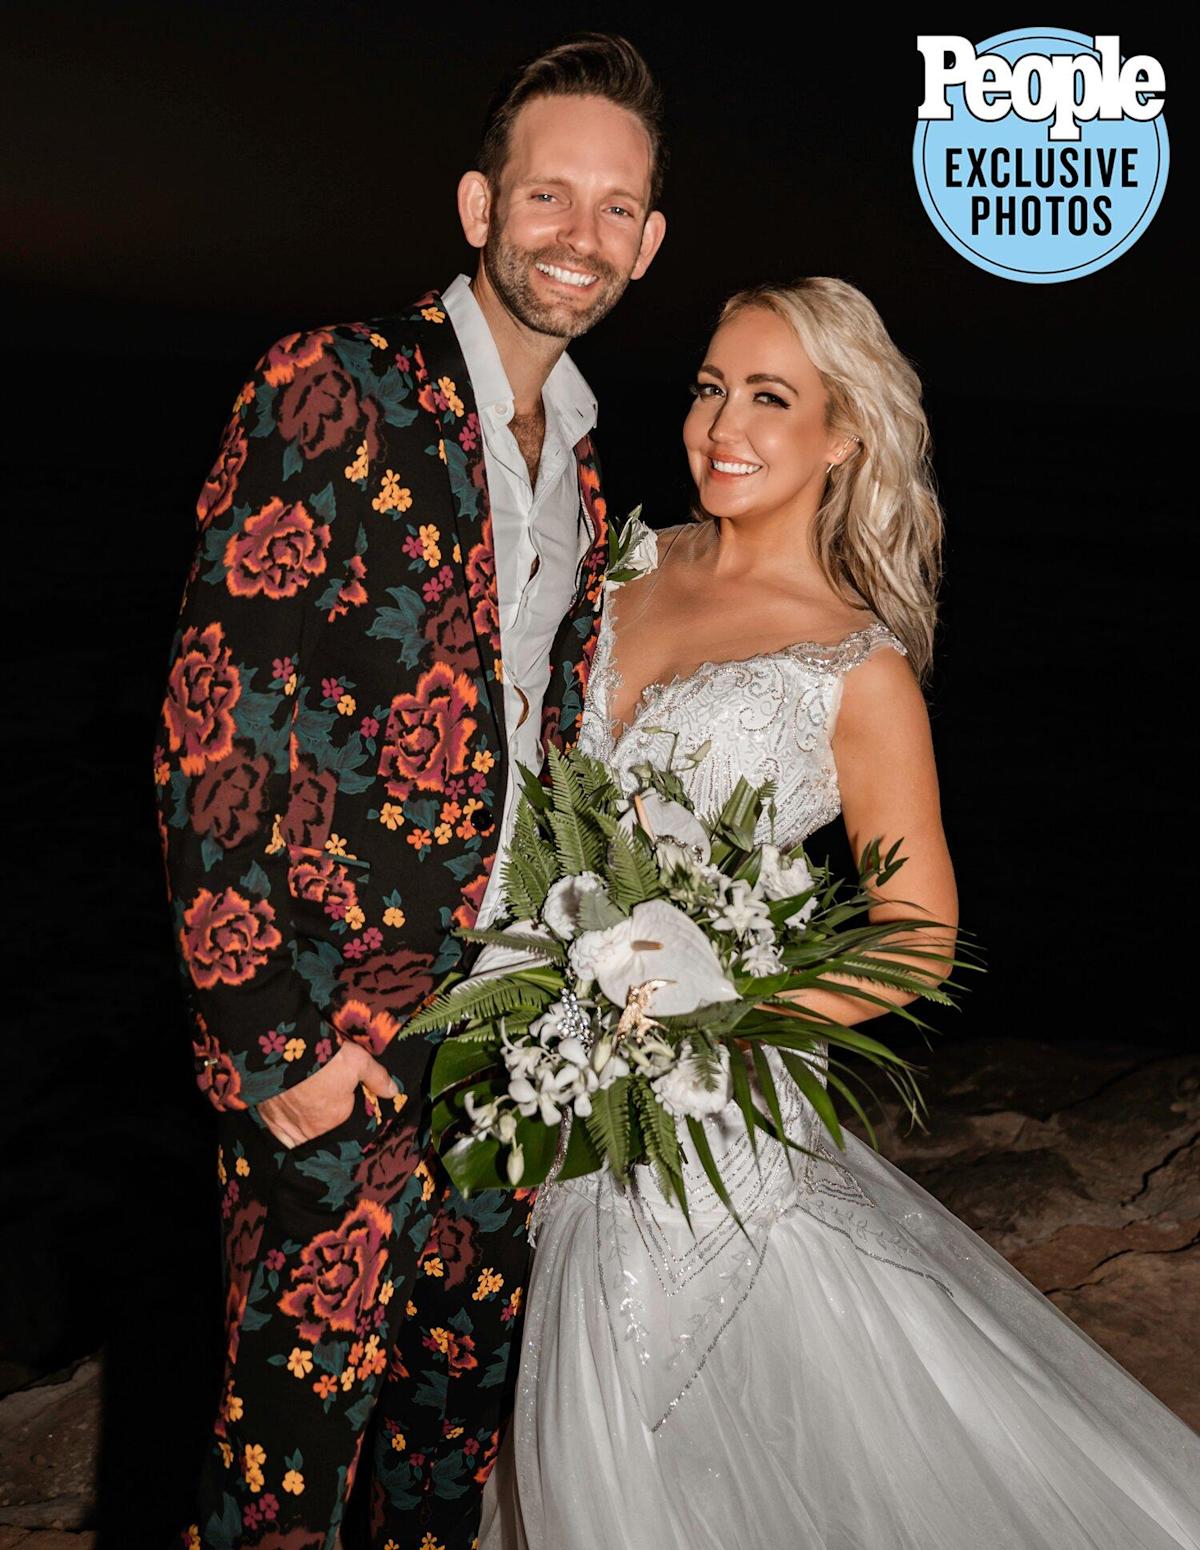 Meghan Linsey and Tyler Cain Elope in Hawaii! See Their Wedding Photos - Yahoo Entertainment 46